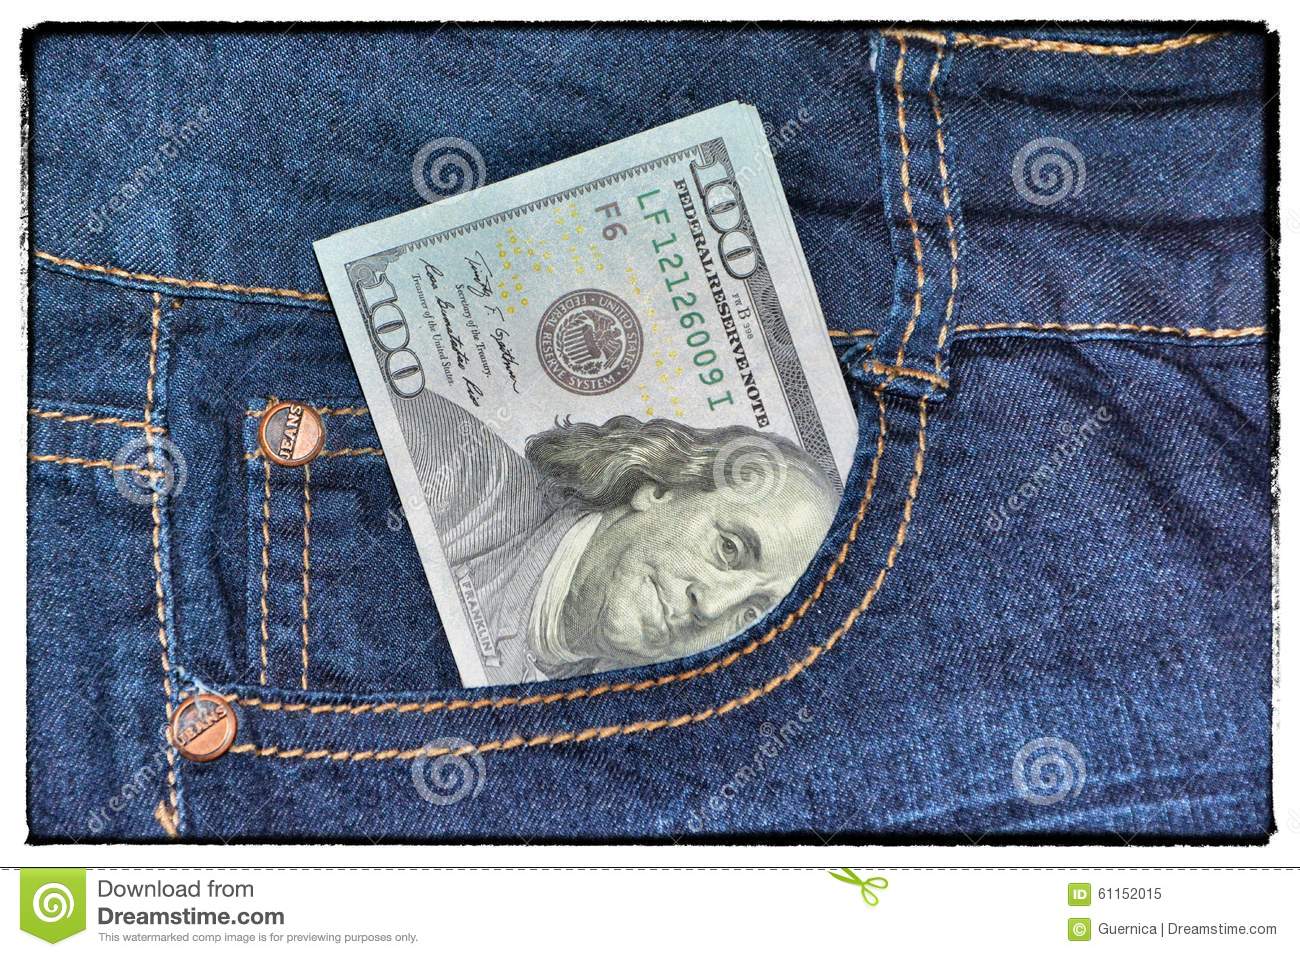 Dollars Usd Grunge Of American Money Is In The Pocket Of Blue Jeans